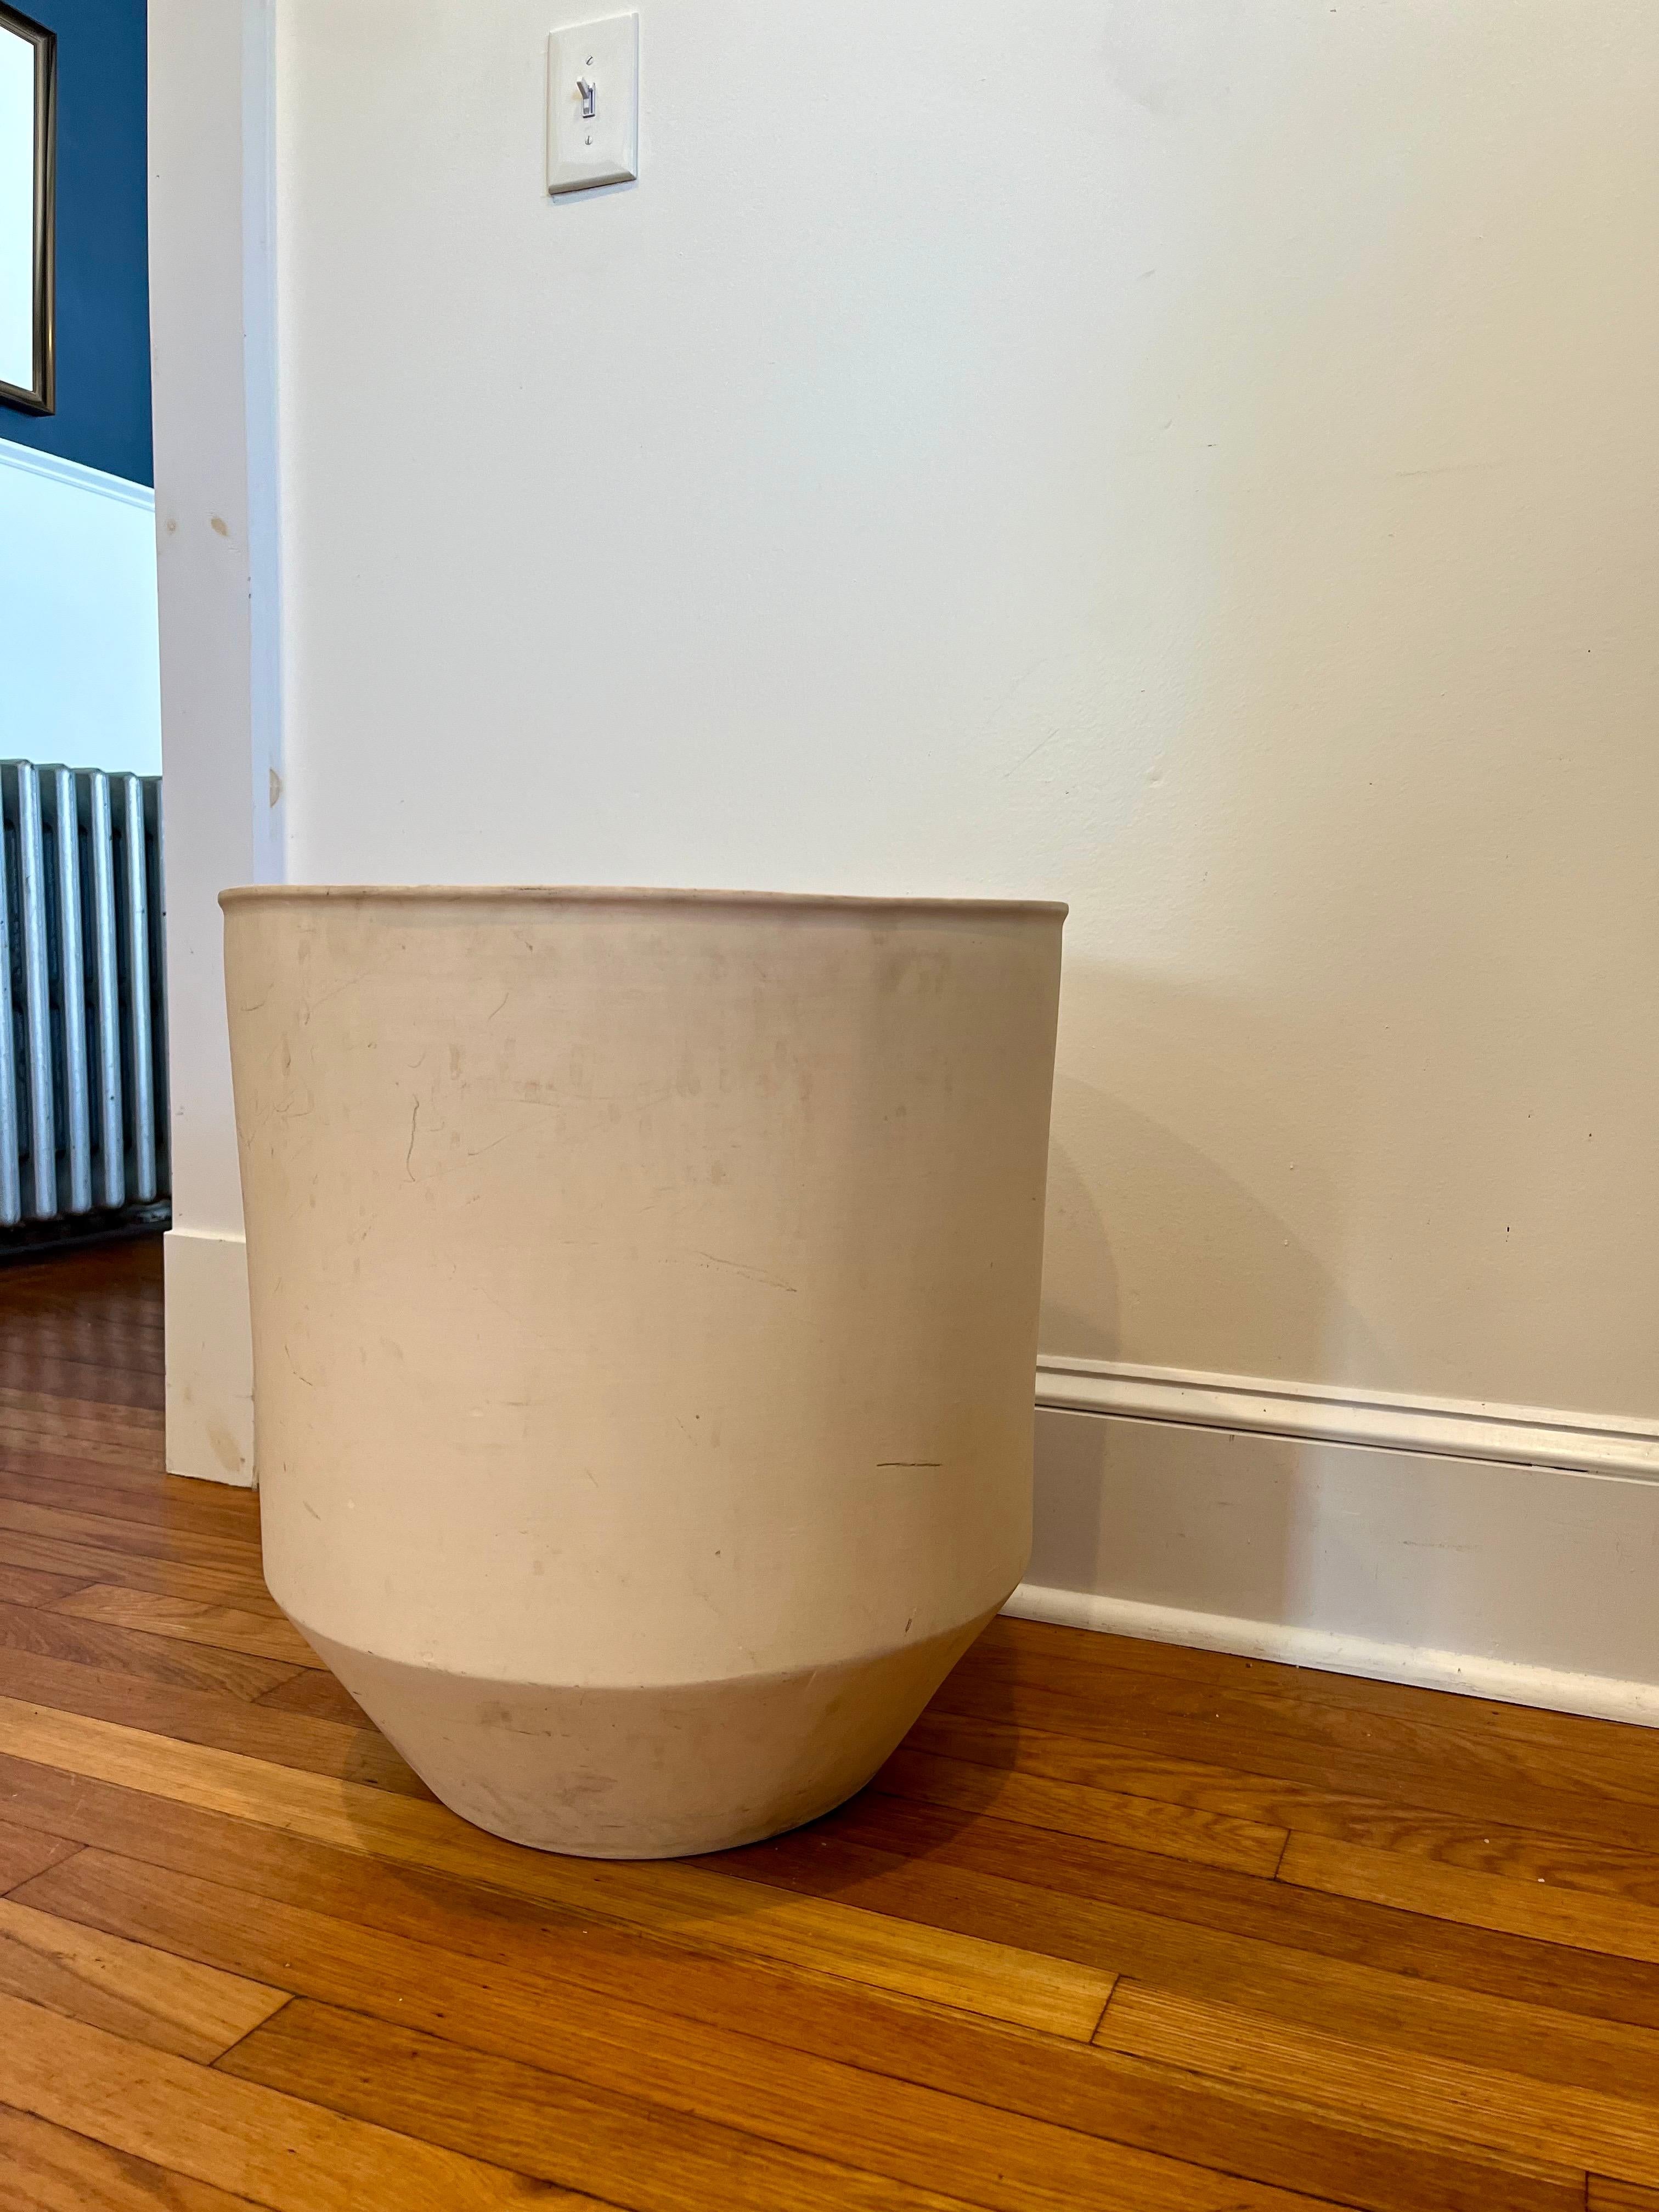 Mid Century Malcolm Leland Planter Bisque Finish In Good Condition For Sale In W Allenhurst, NJ